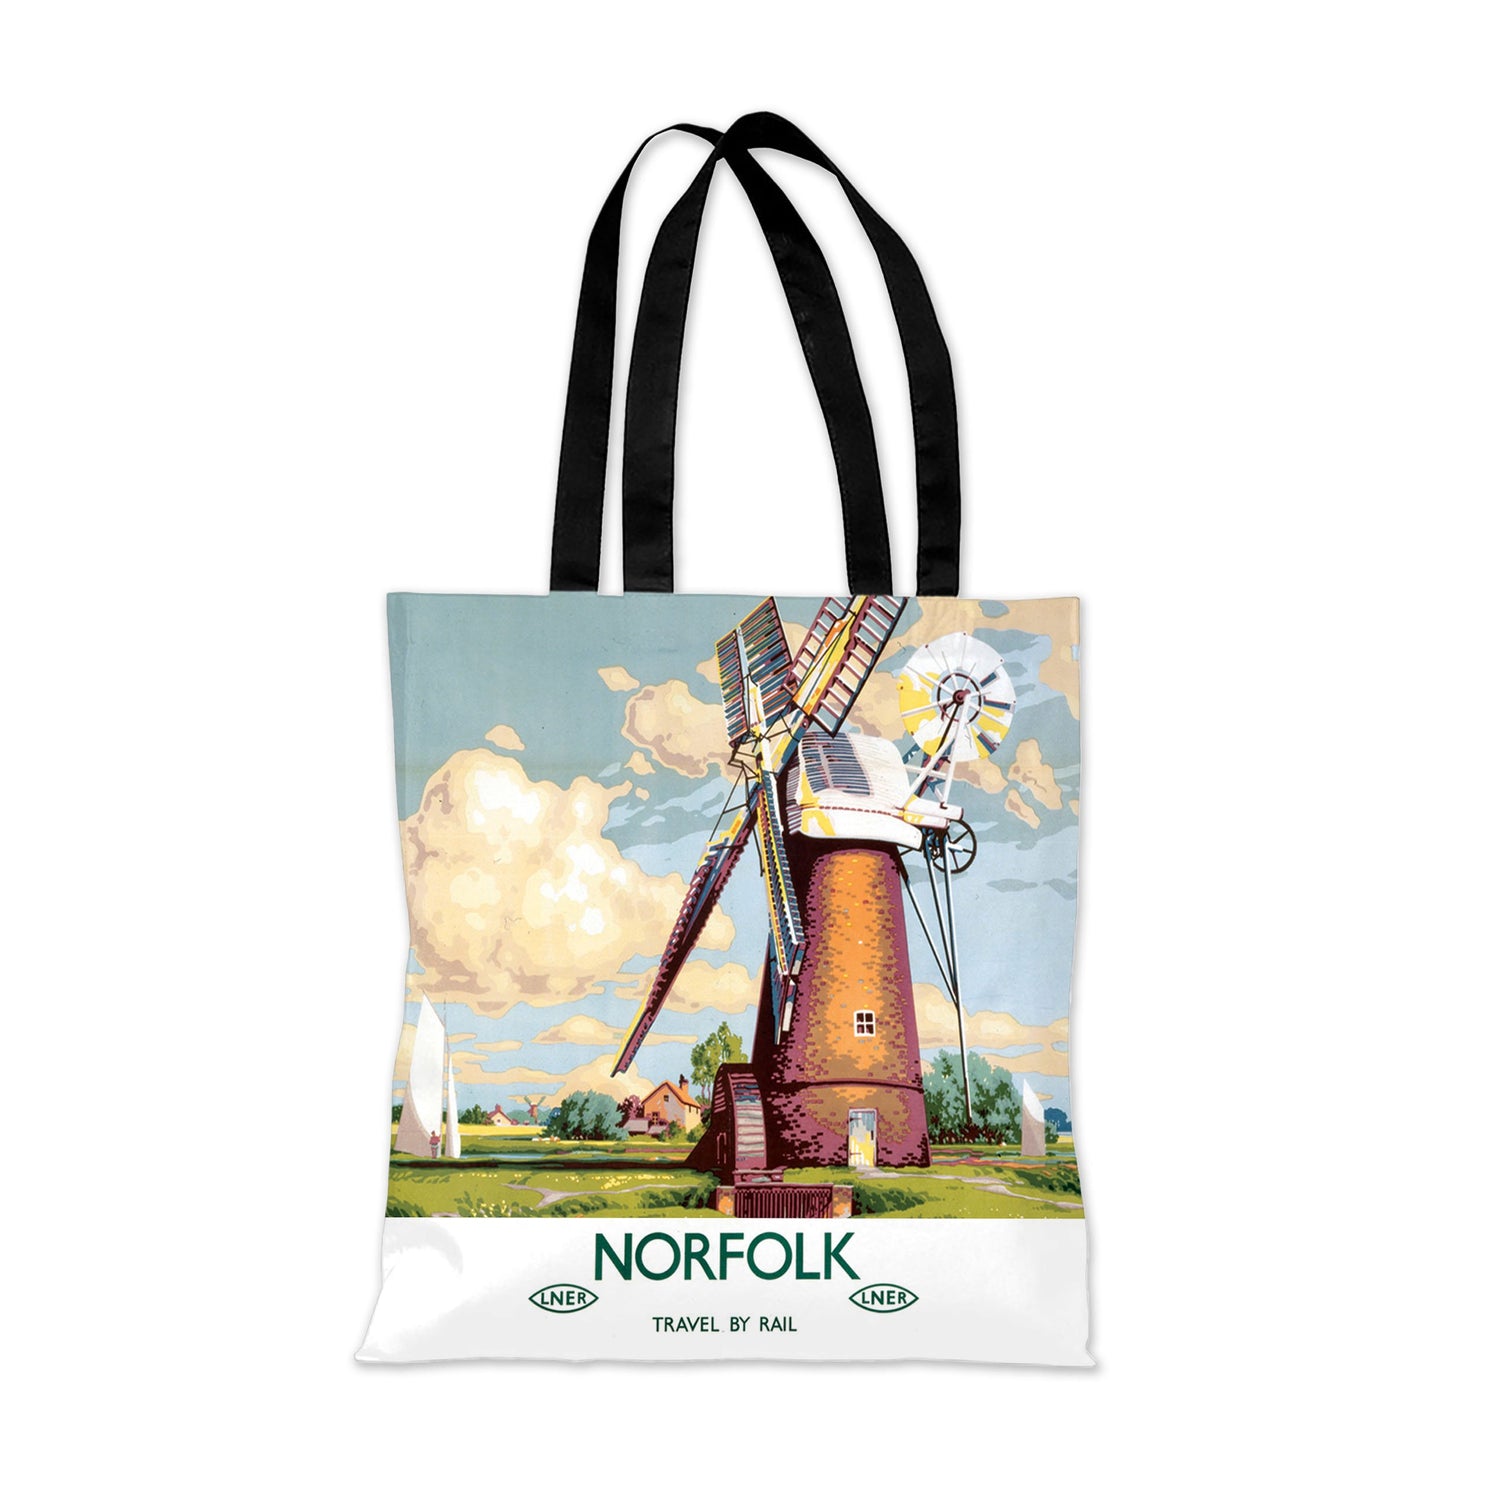 Cromer Girl with Red Material - Edge to Edge Tote Bag